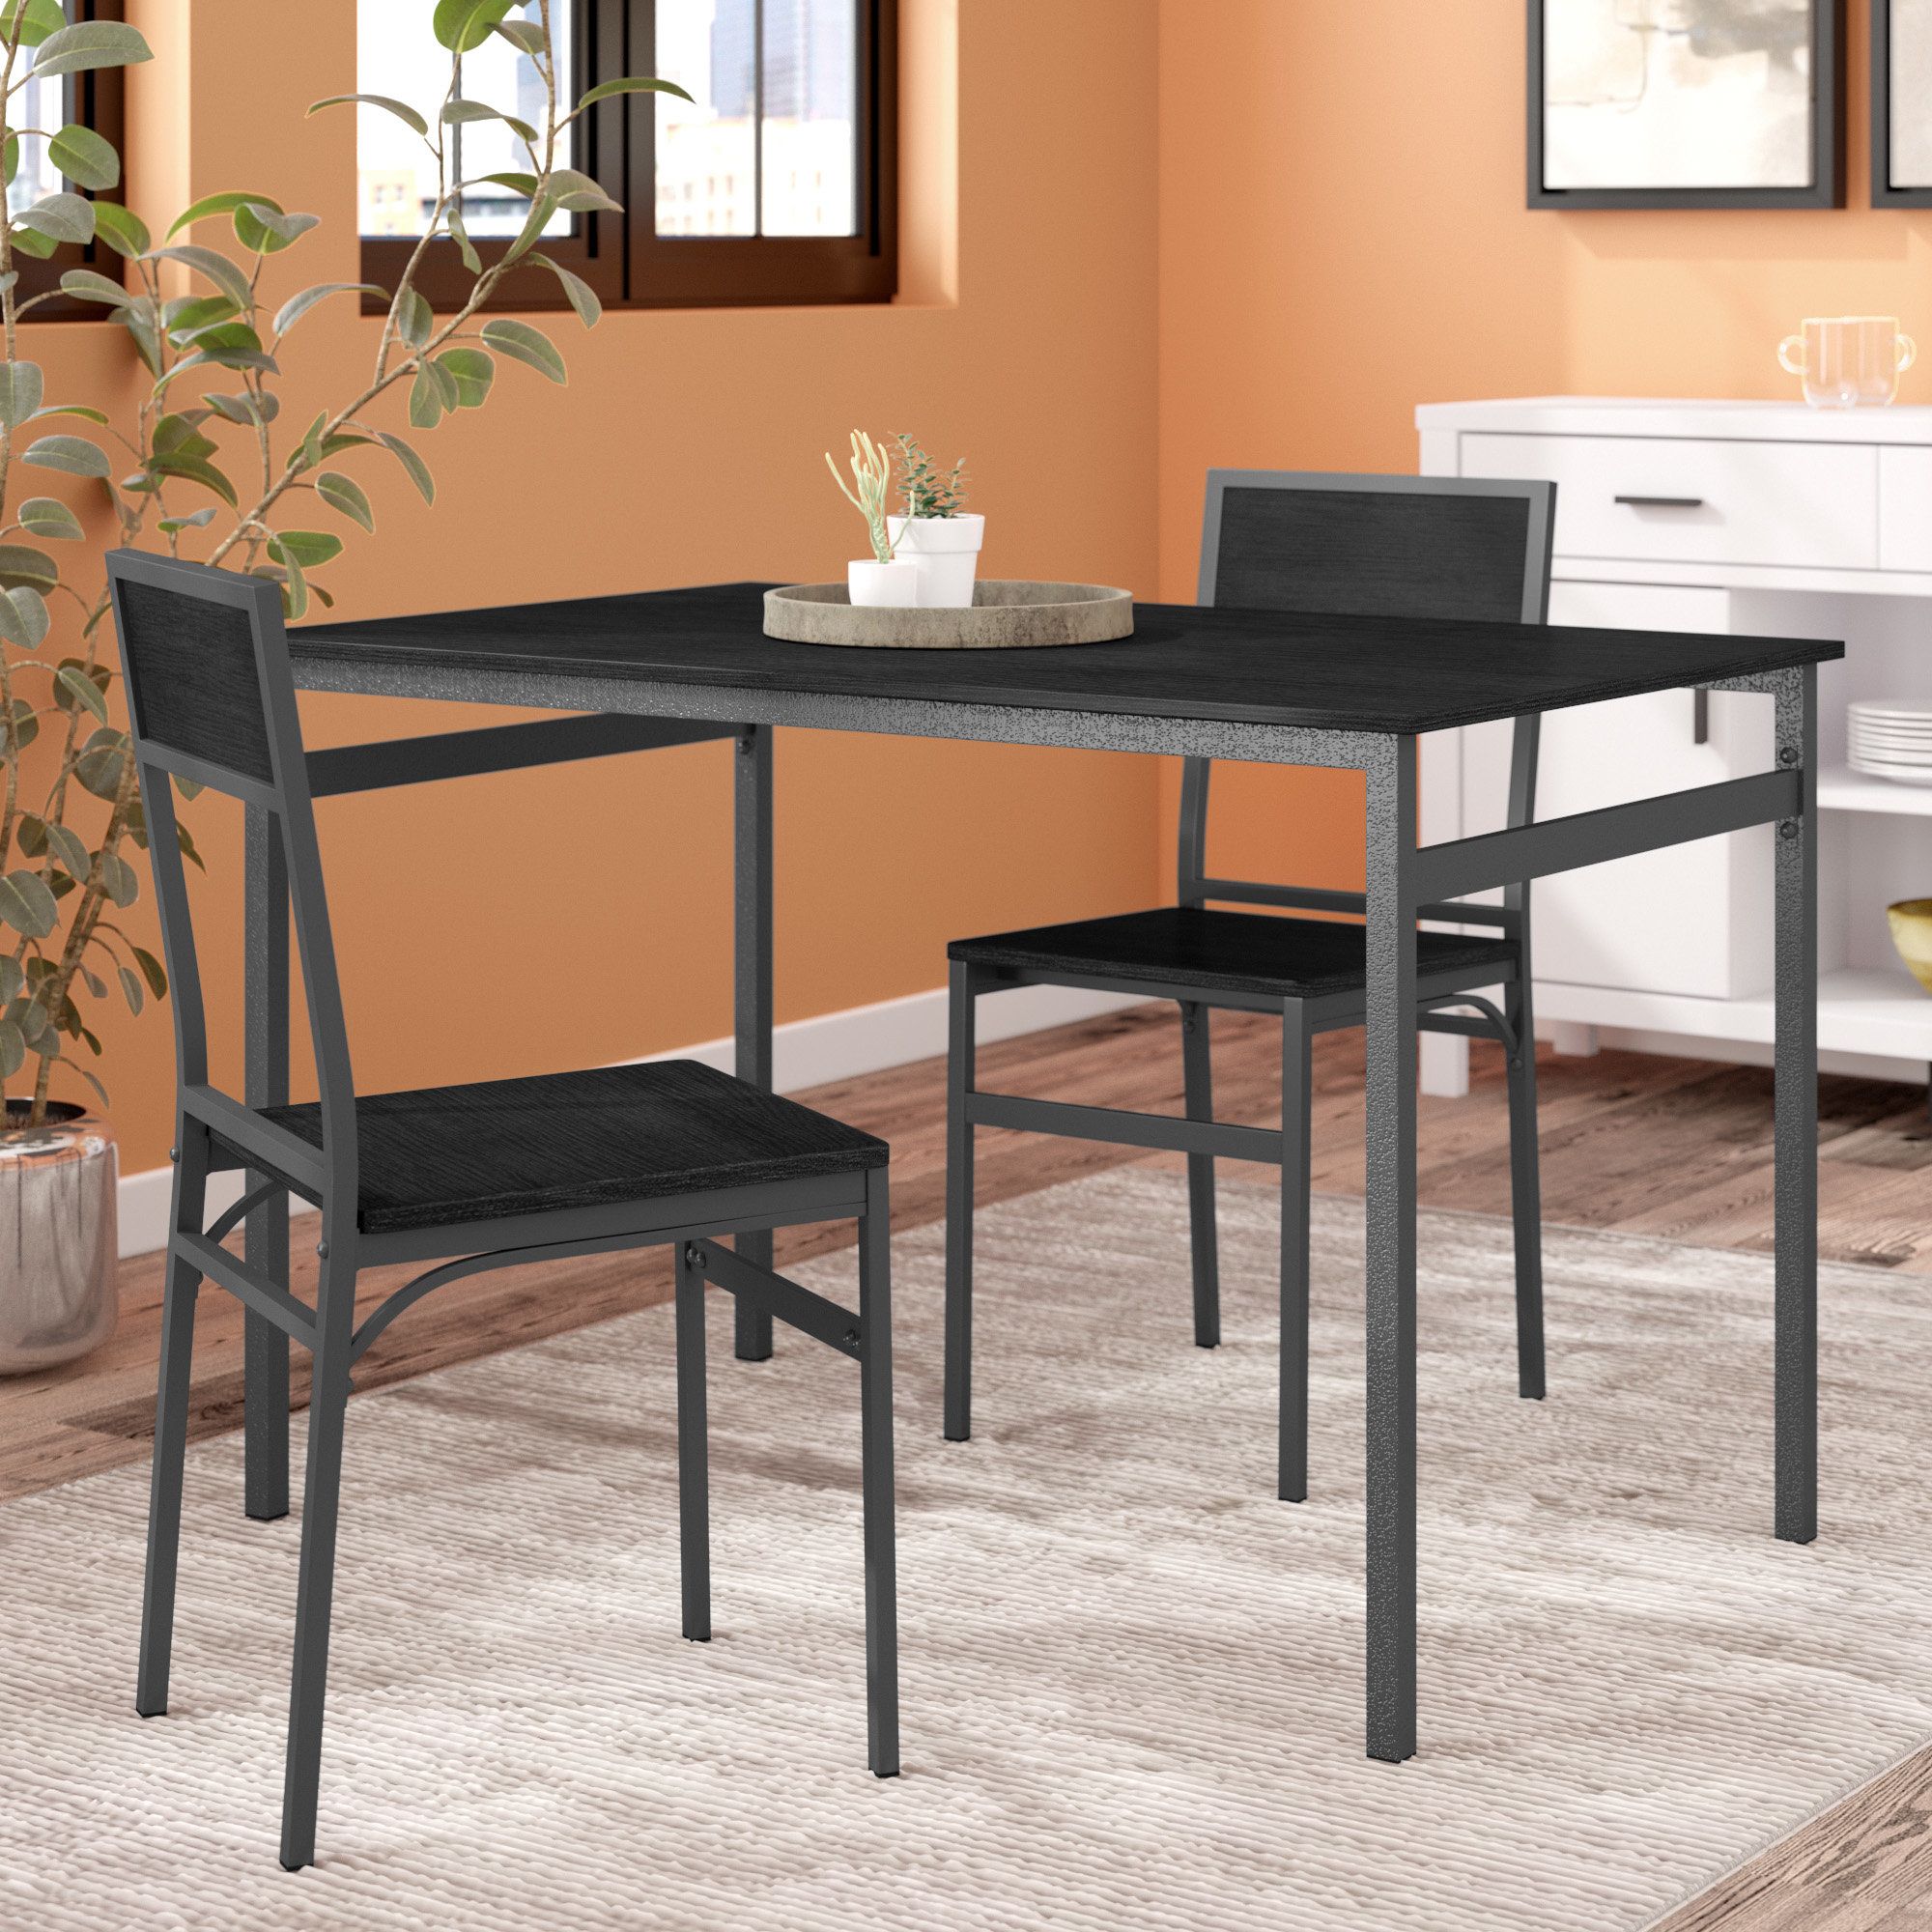 Featured Image of Springfield 3 Piece Dining Sets